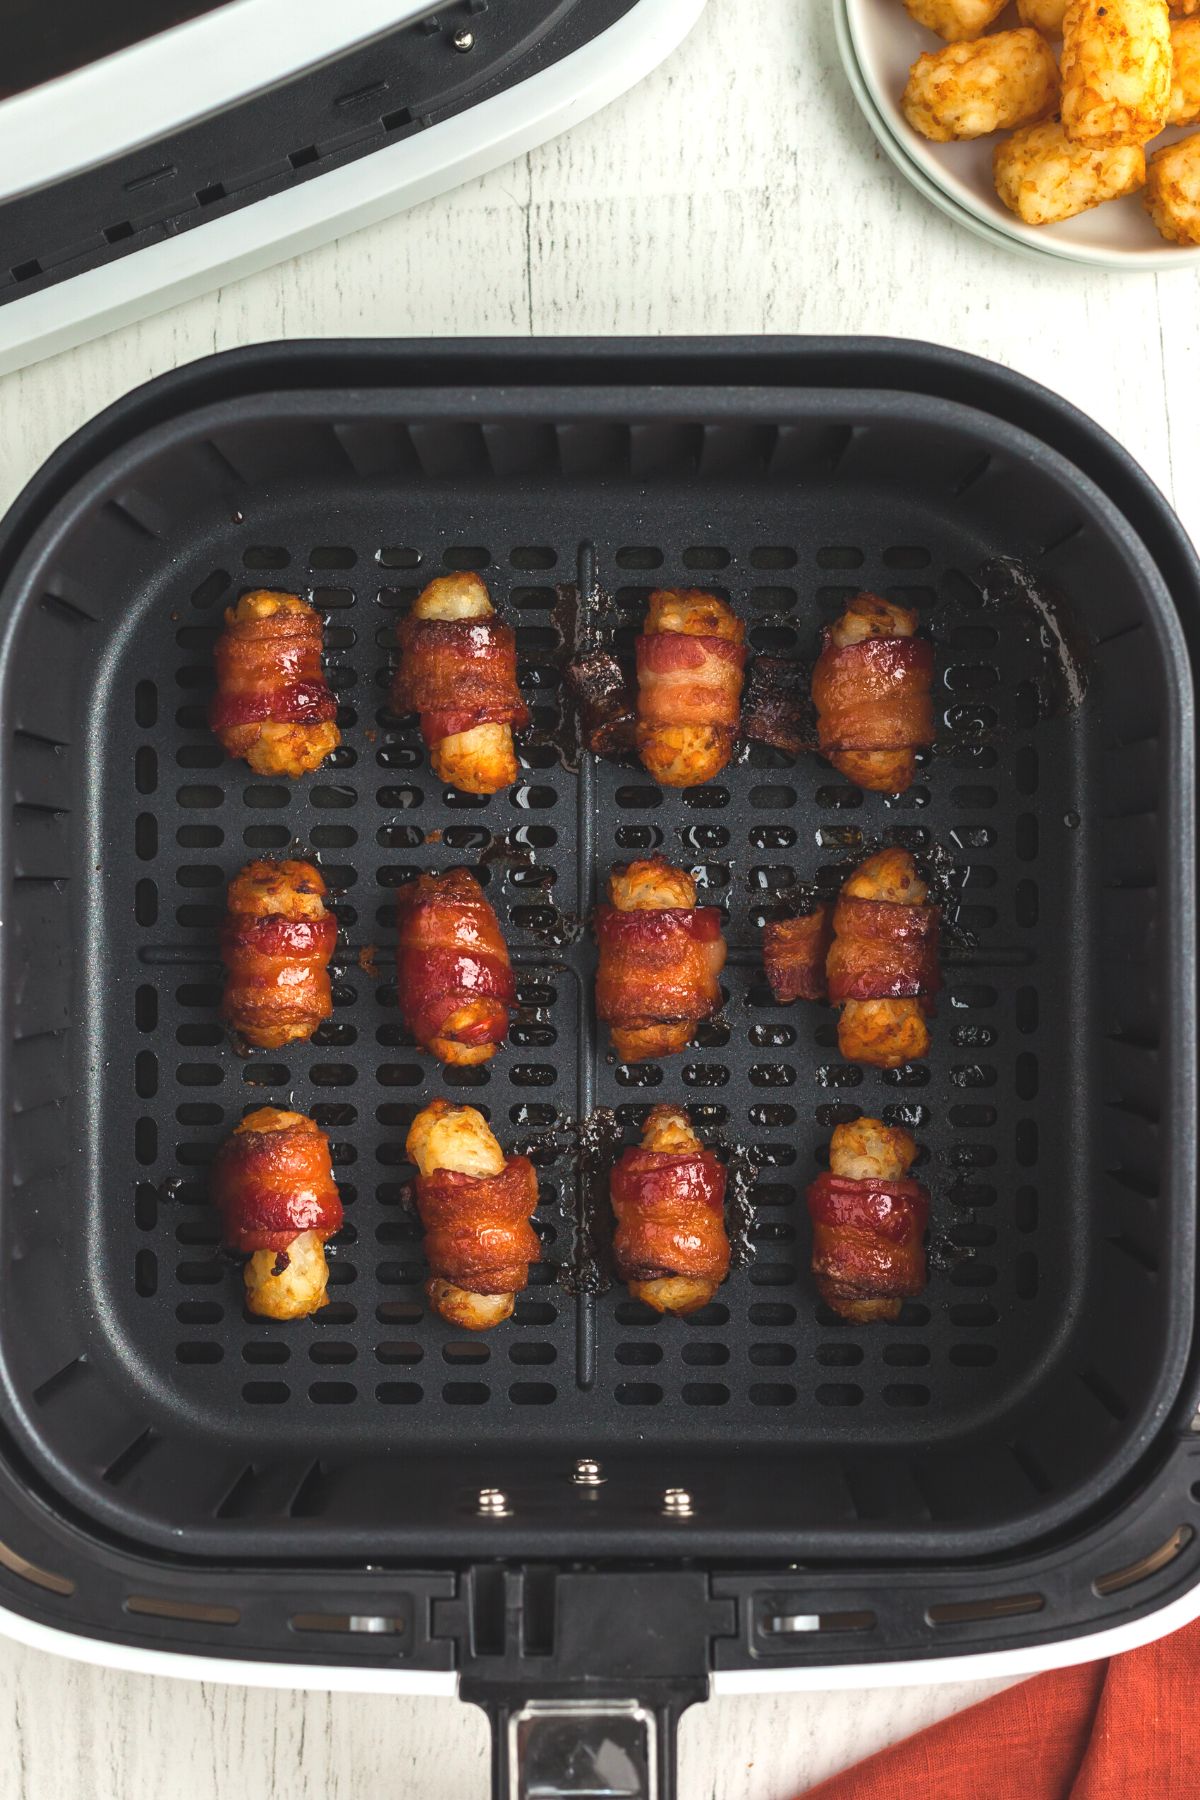 Crispy bacon wrapped tater tots in the air fryer basket